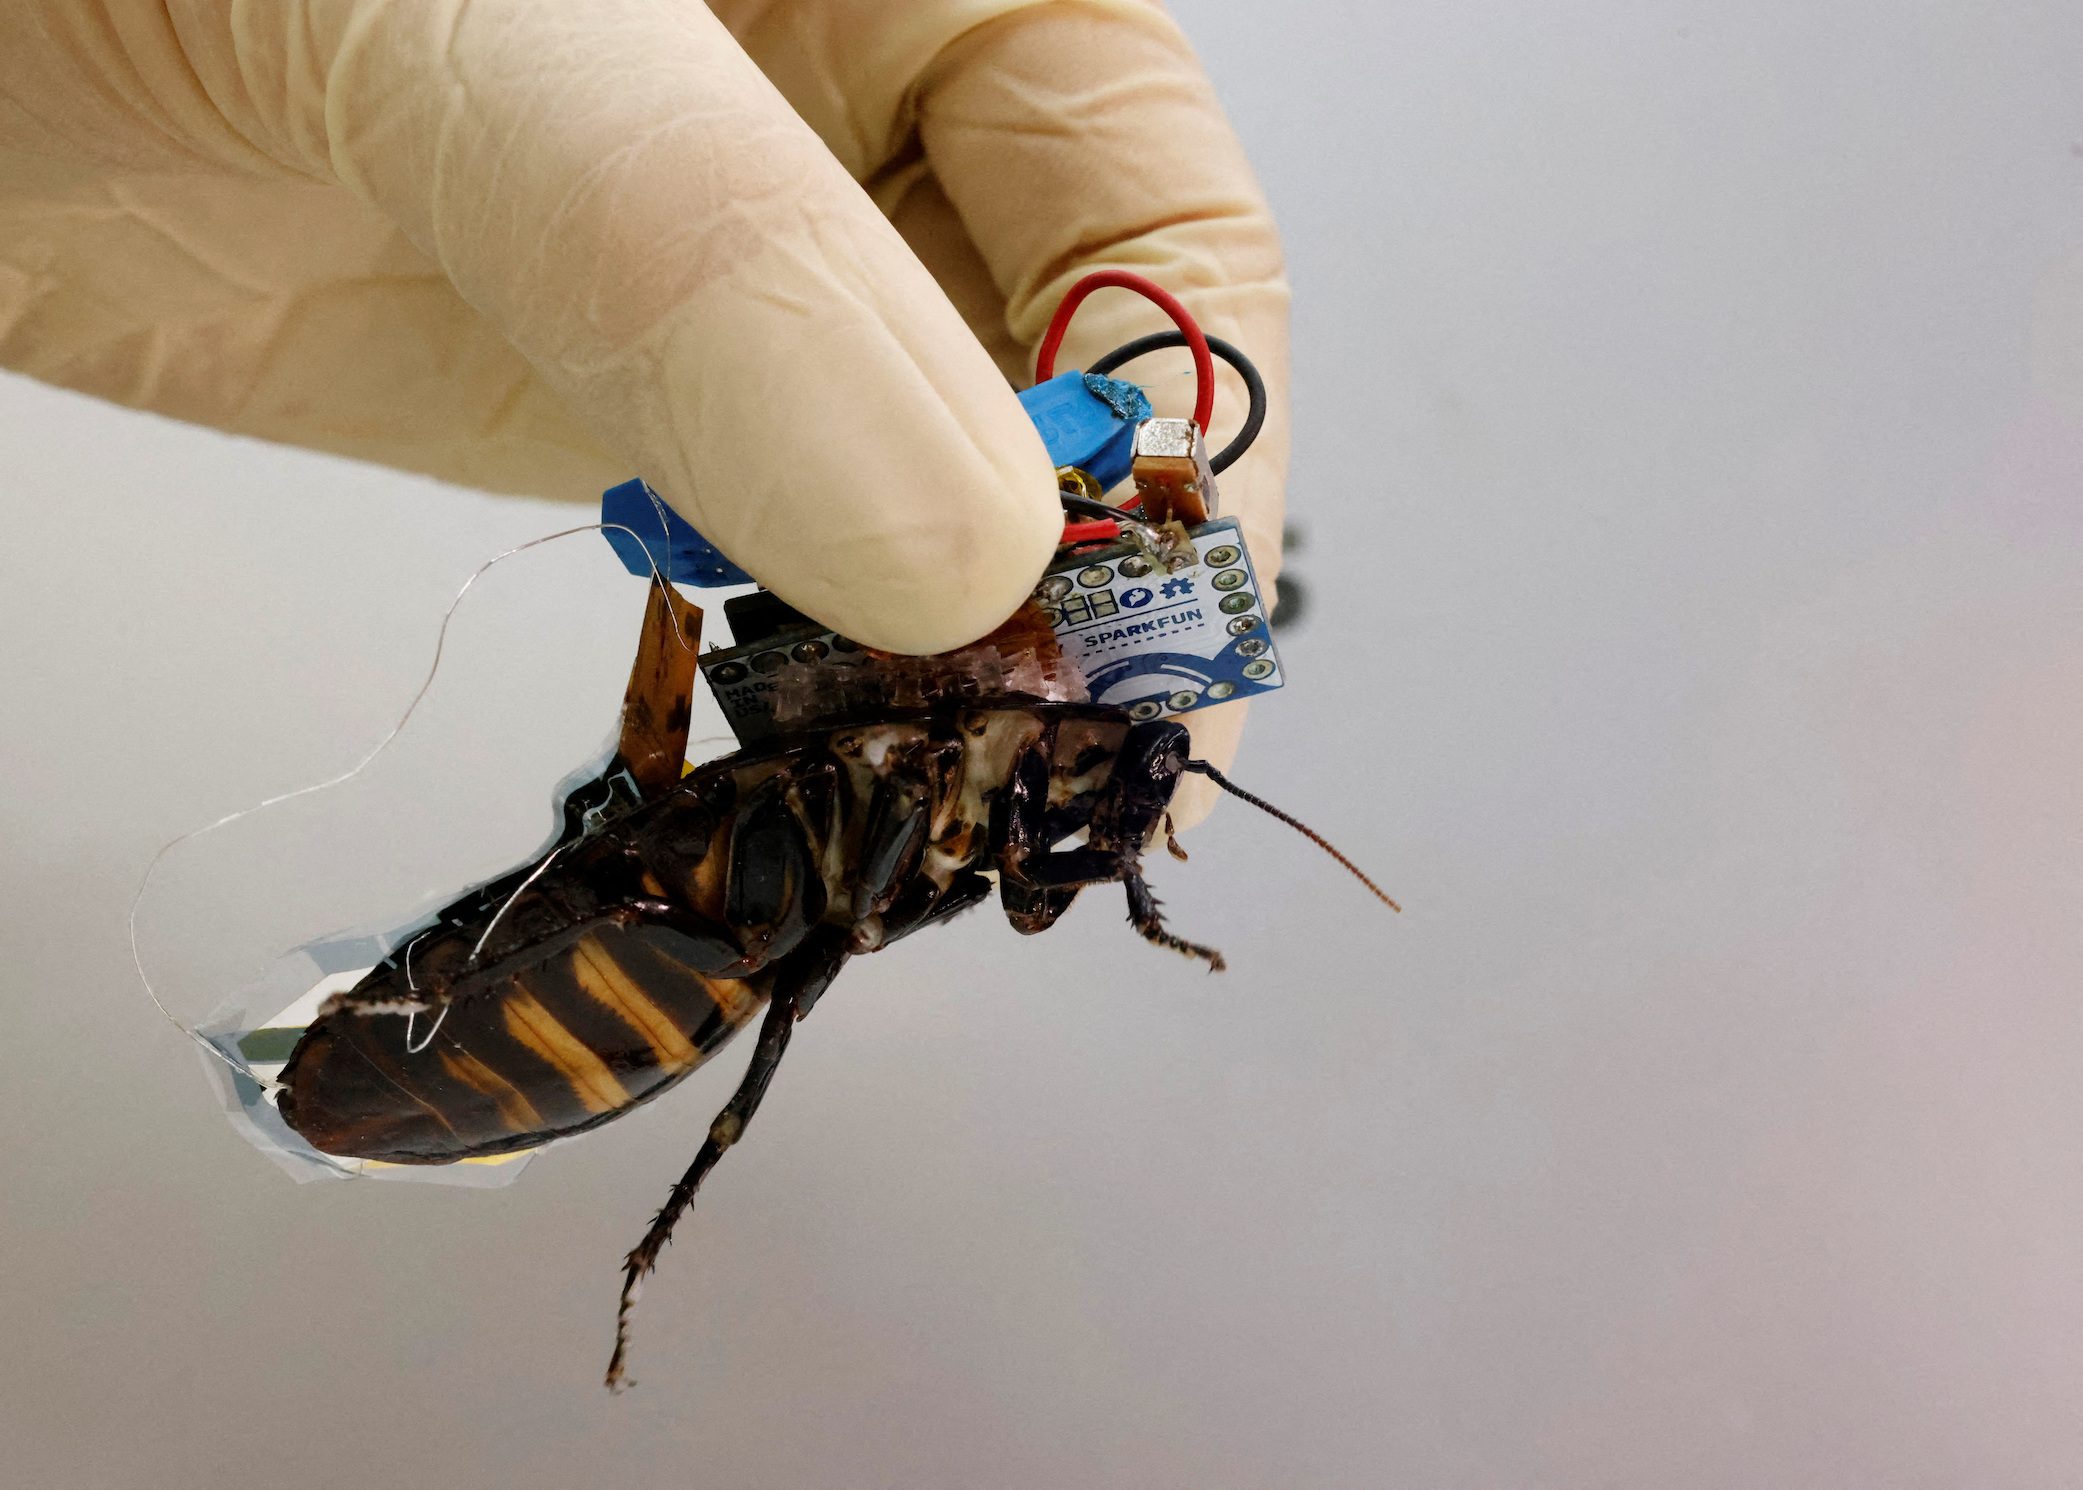 Meet Japan’s cyborg cockroach, coming to disaster area near you